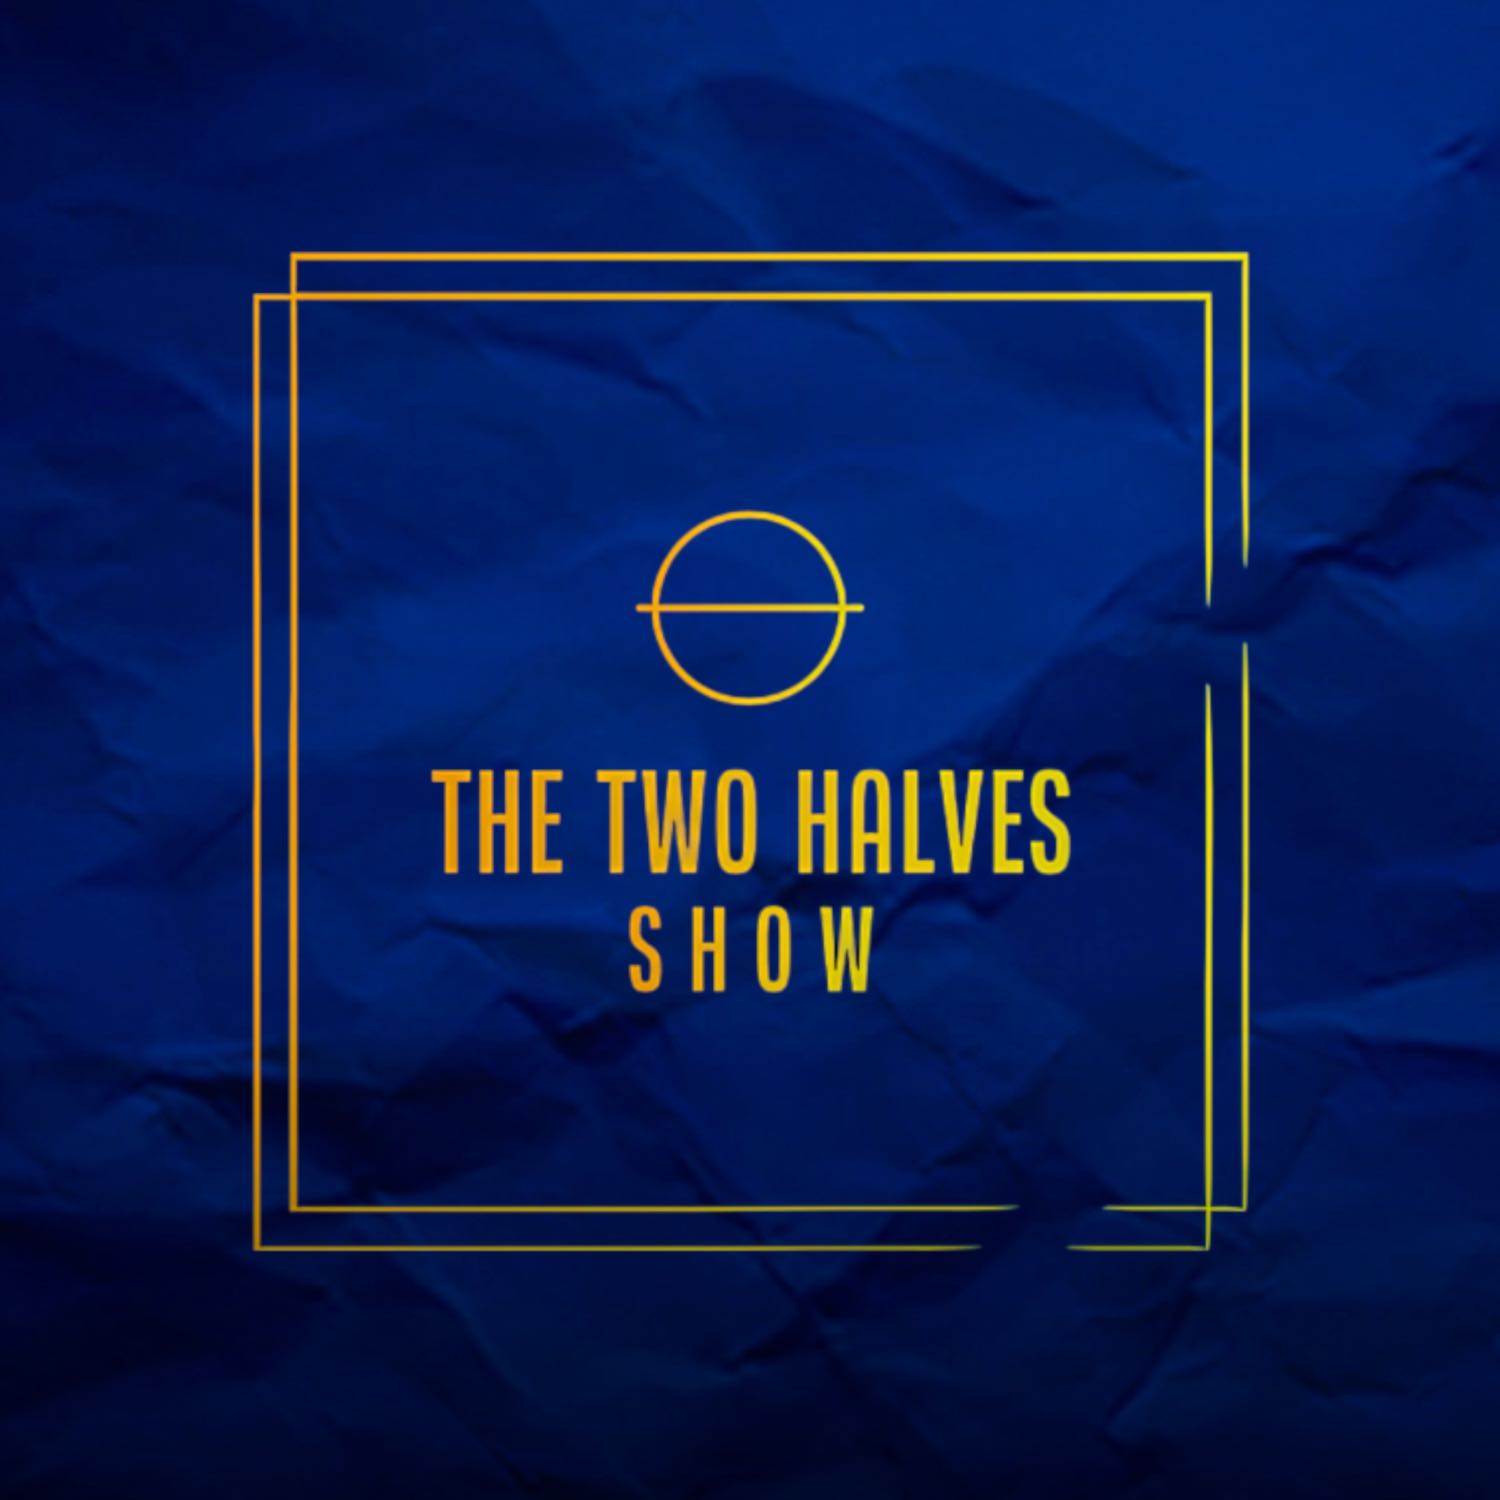 The Two Halves Show Ep 11 - Benzema Wins the Balon D'or | Potters Chelsea Shine | NBA Season Preview